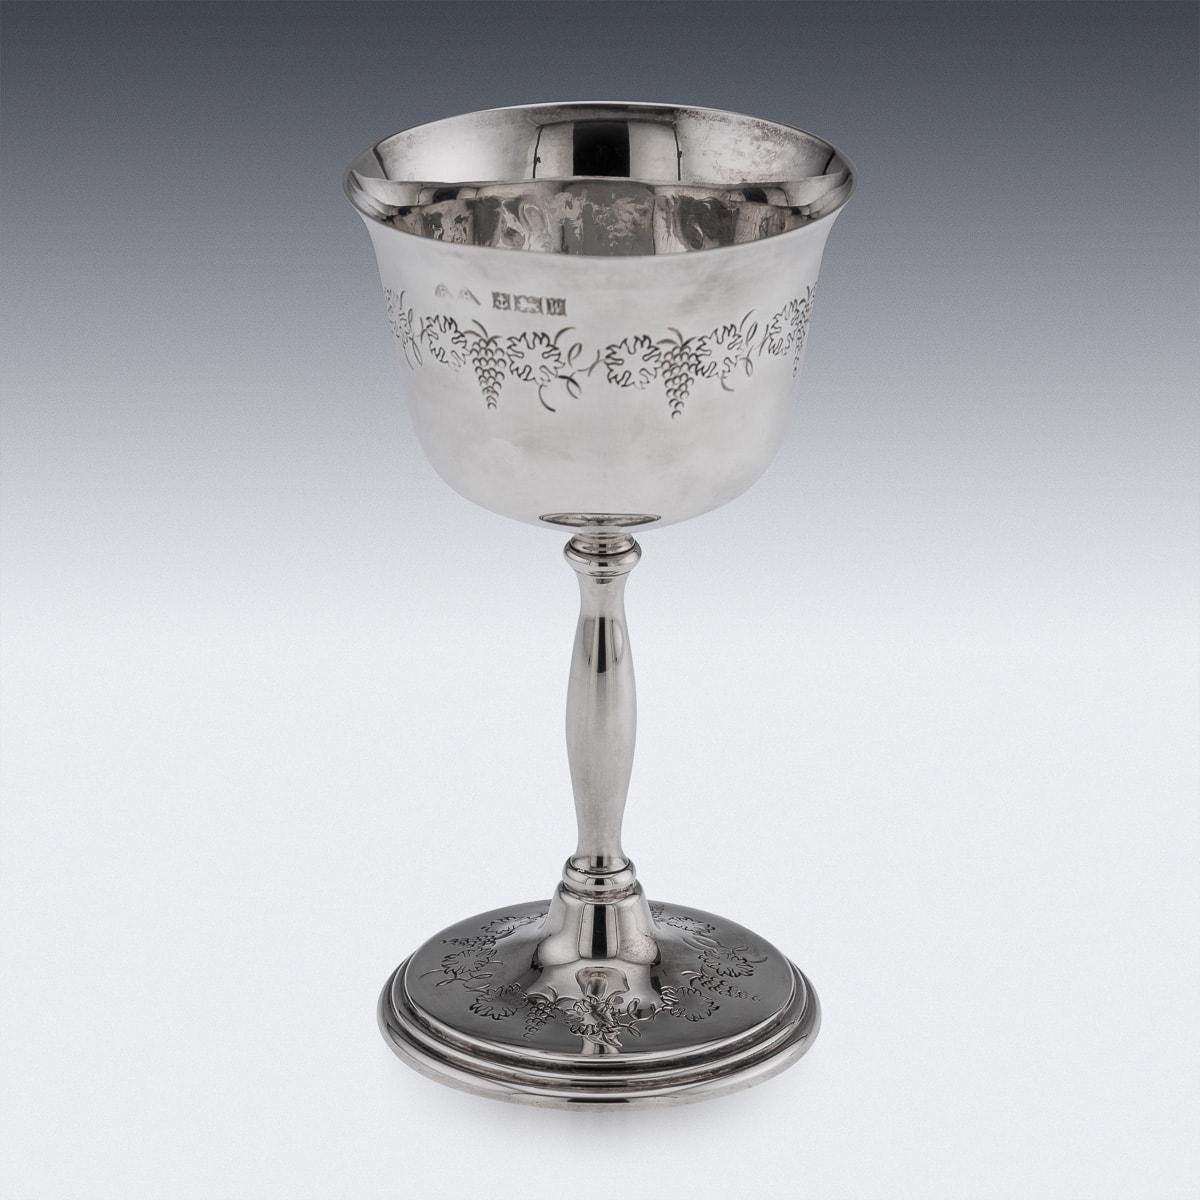 Late 20th Century 20th Century Set Of Six Solid Silver Wine Goblets By Cavalier, England c.1970s